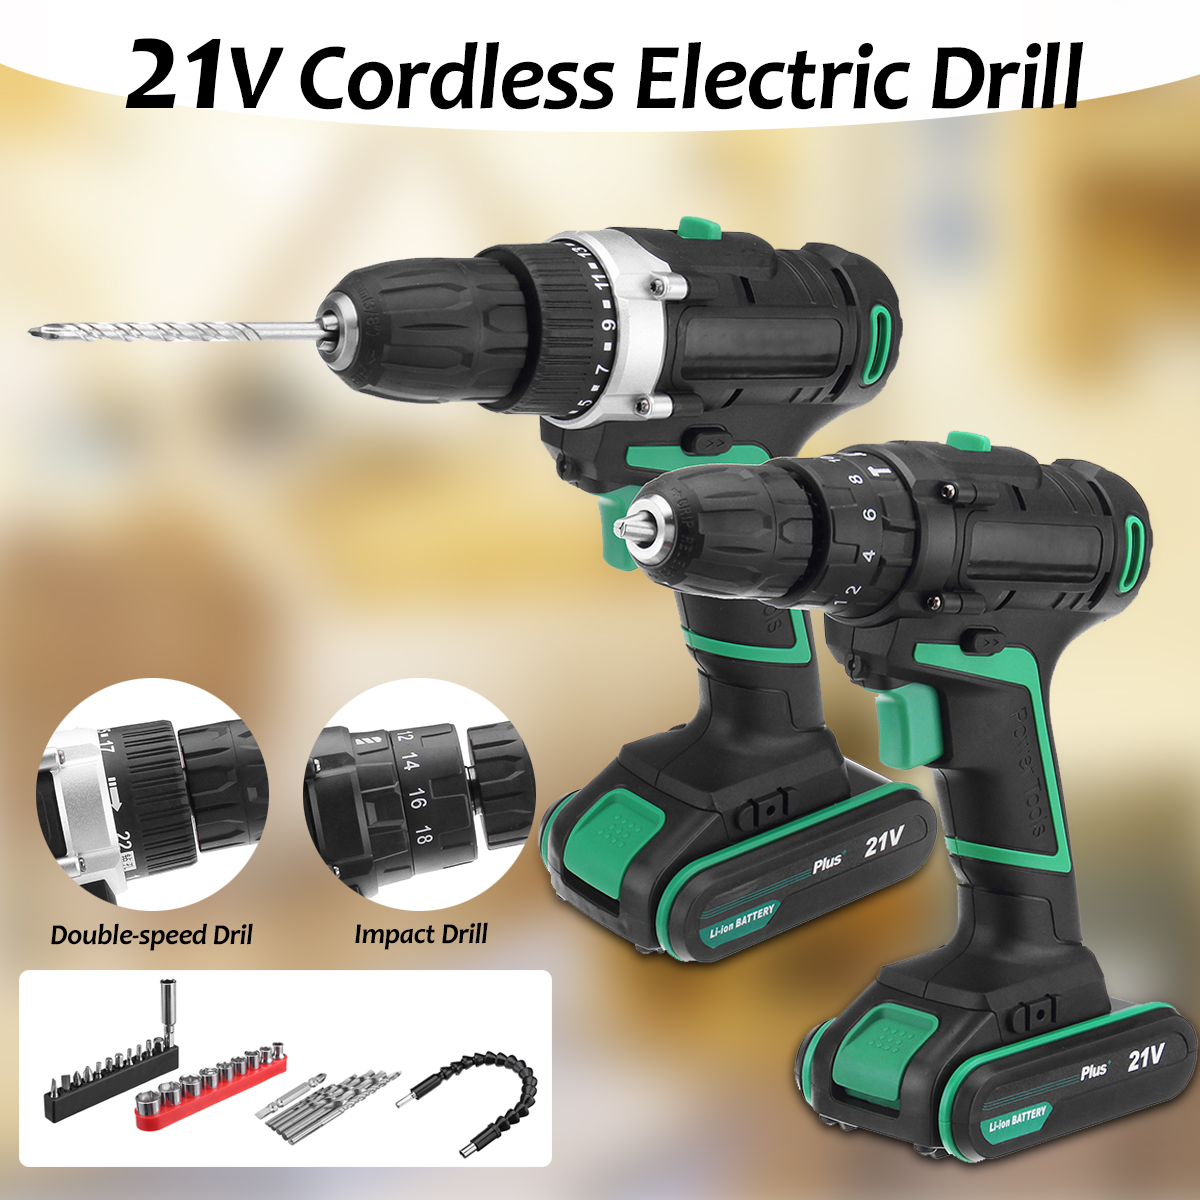 AC100-240V-Li-ion-Cordless-Electric-Screwdriver-Power-Drills-1-Battery-1-Charger-With-Accessories-1285827-1